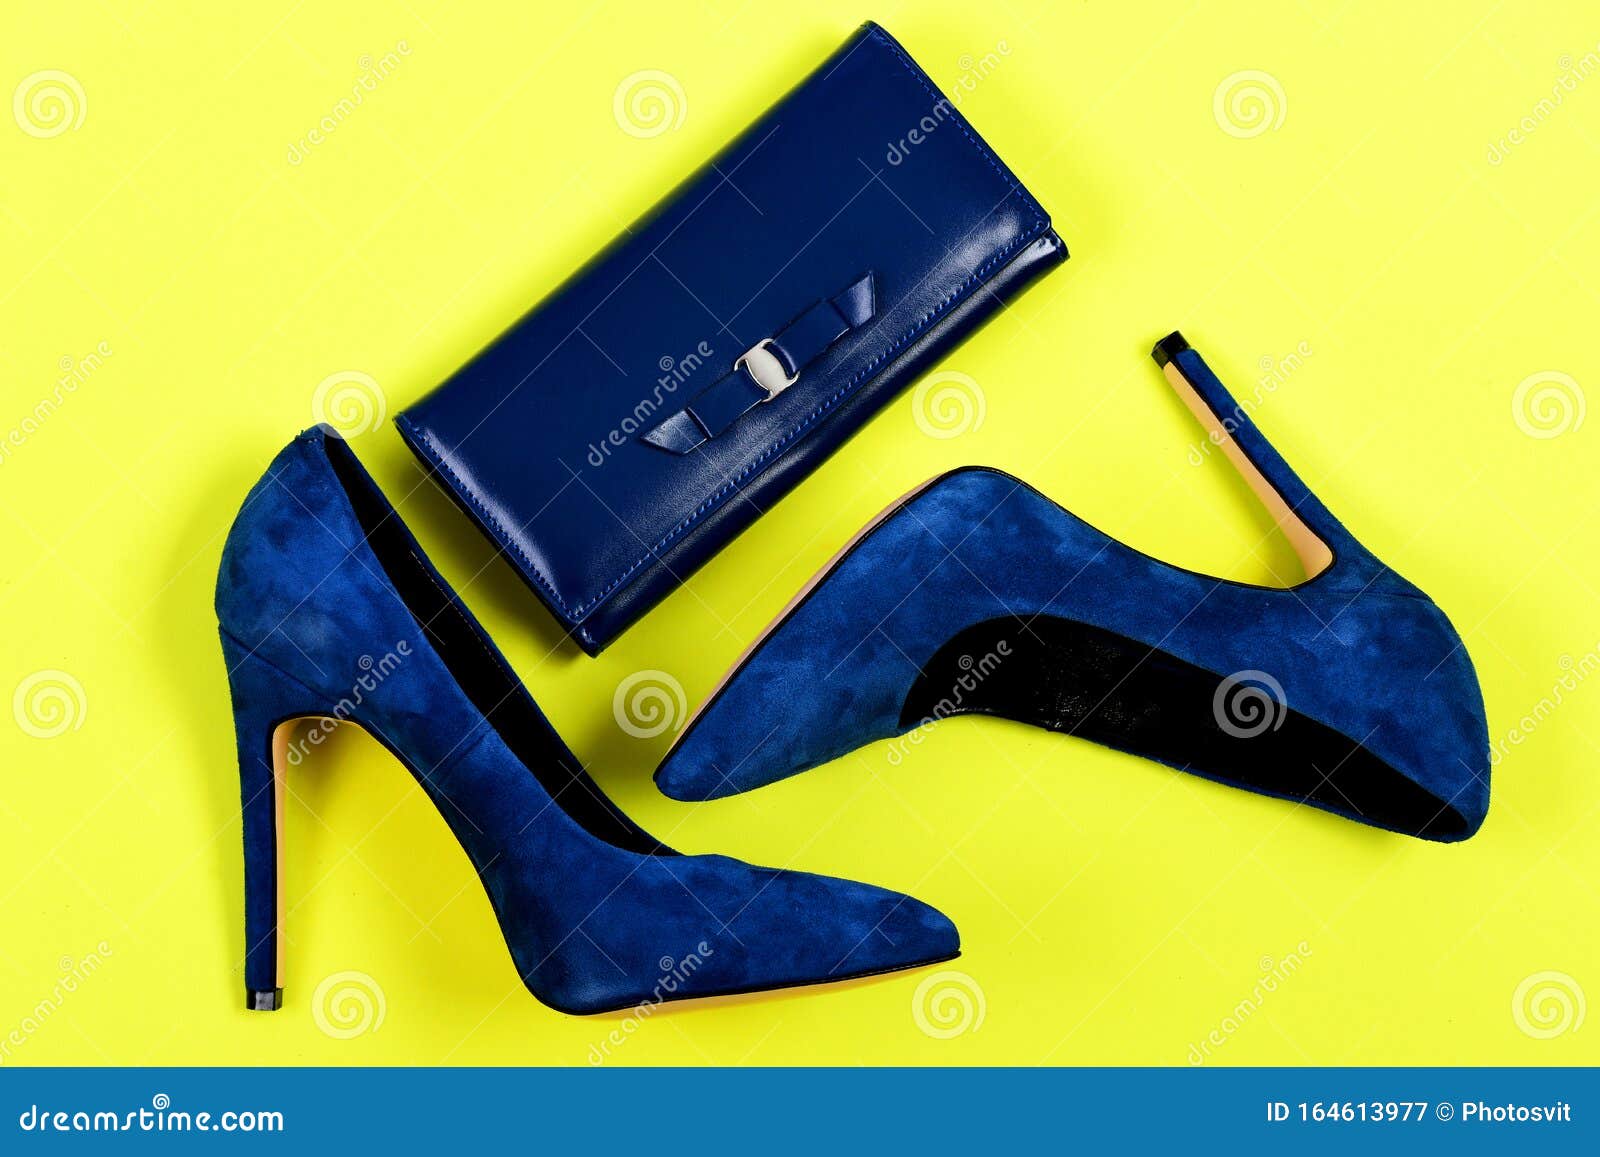 Purse And Shoes In Dark Blue Color. Fashion And Style Stock Image ...